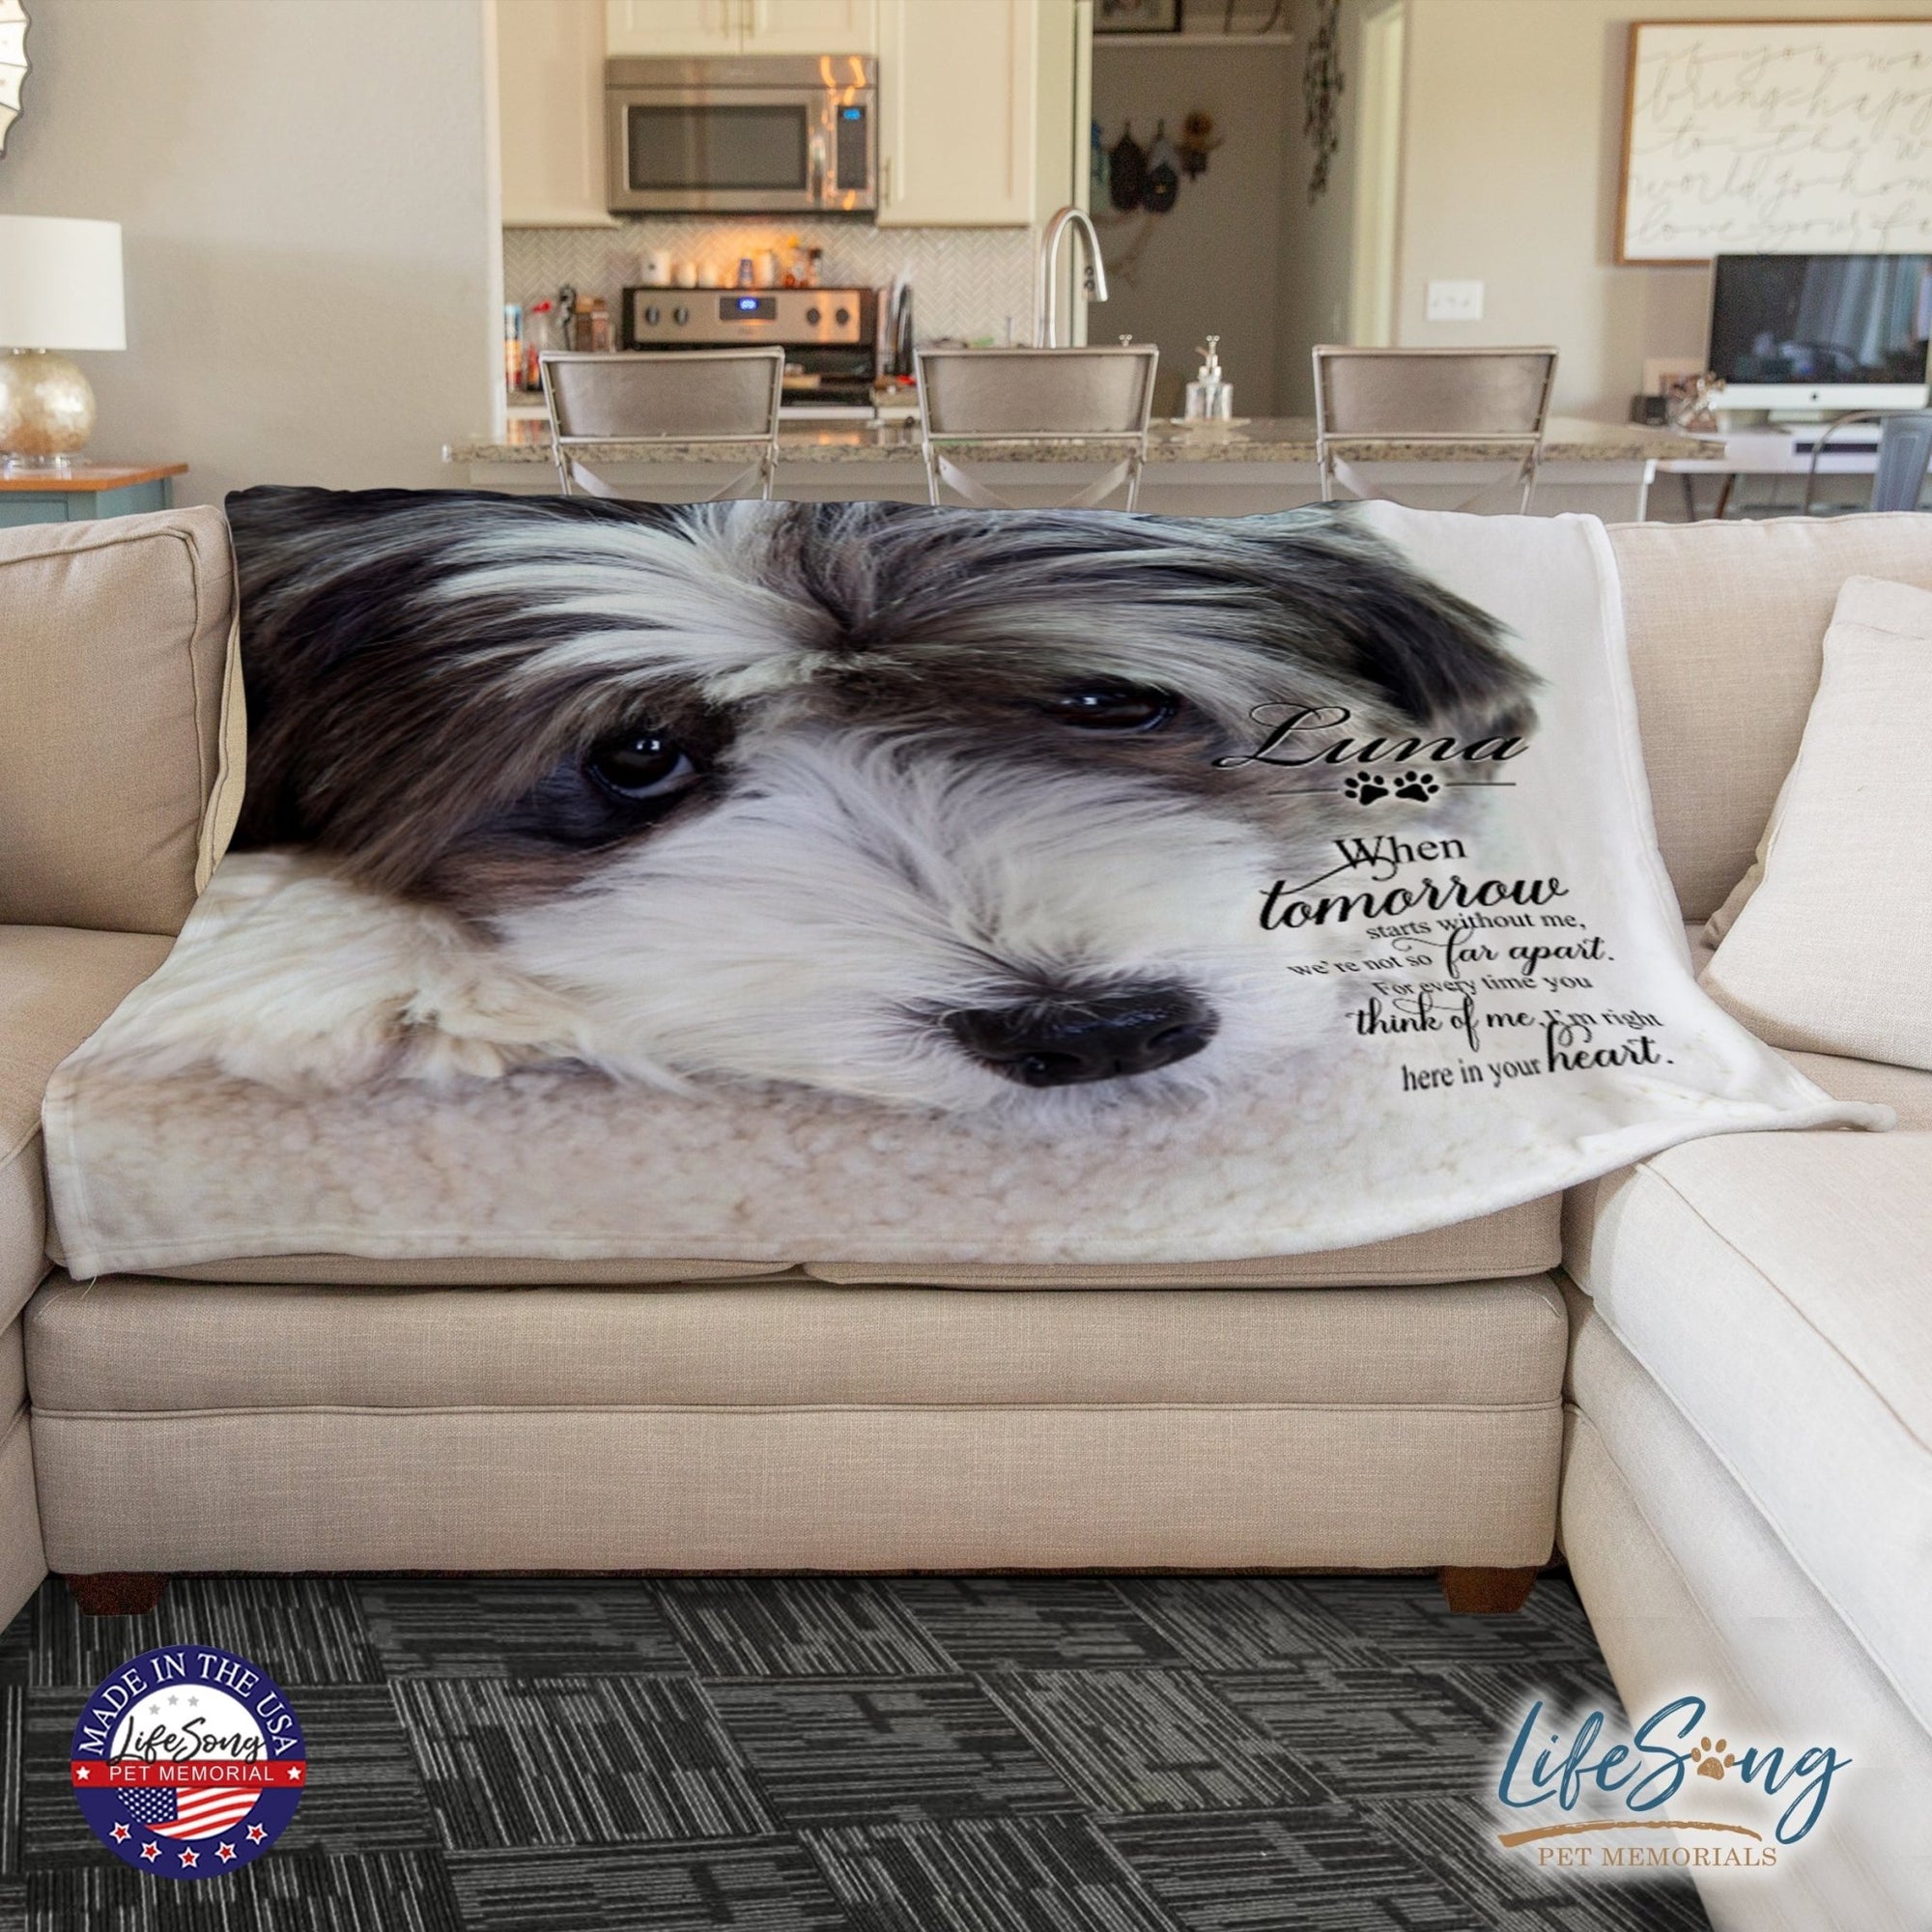 Personalized Pet Memorial Printed Throw Blanket - When Tomorrow Starts Without Me - LifeSong Milestones